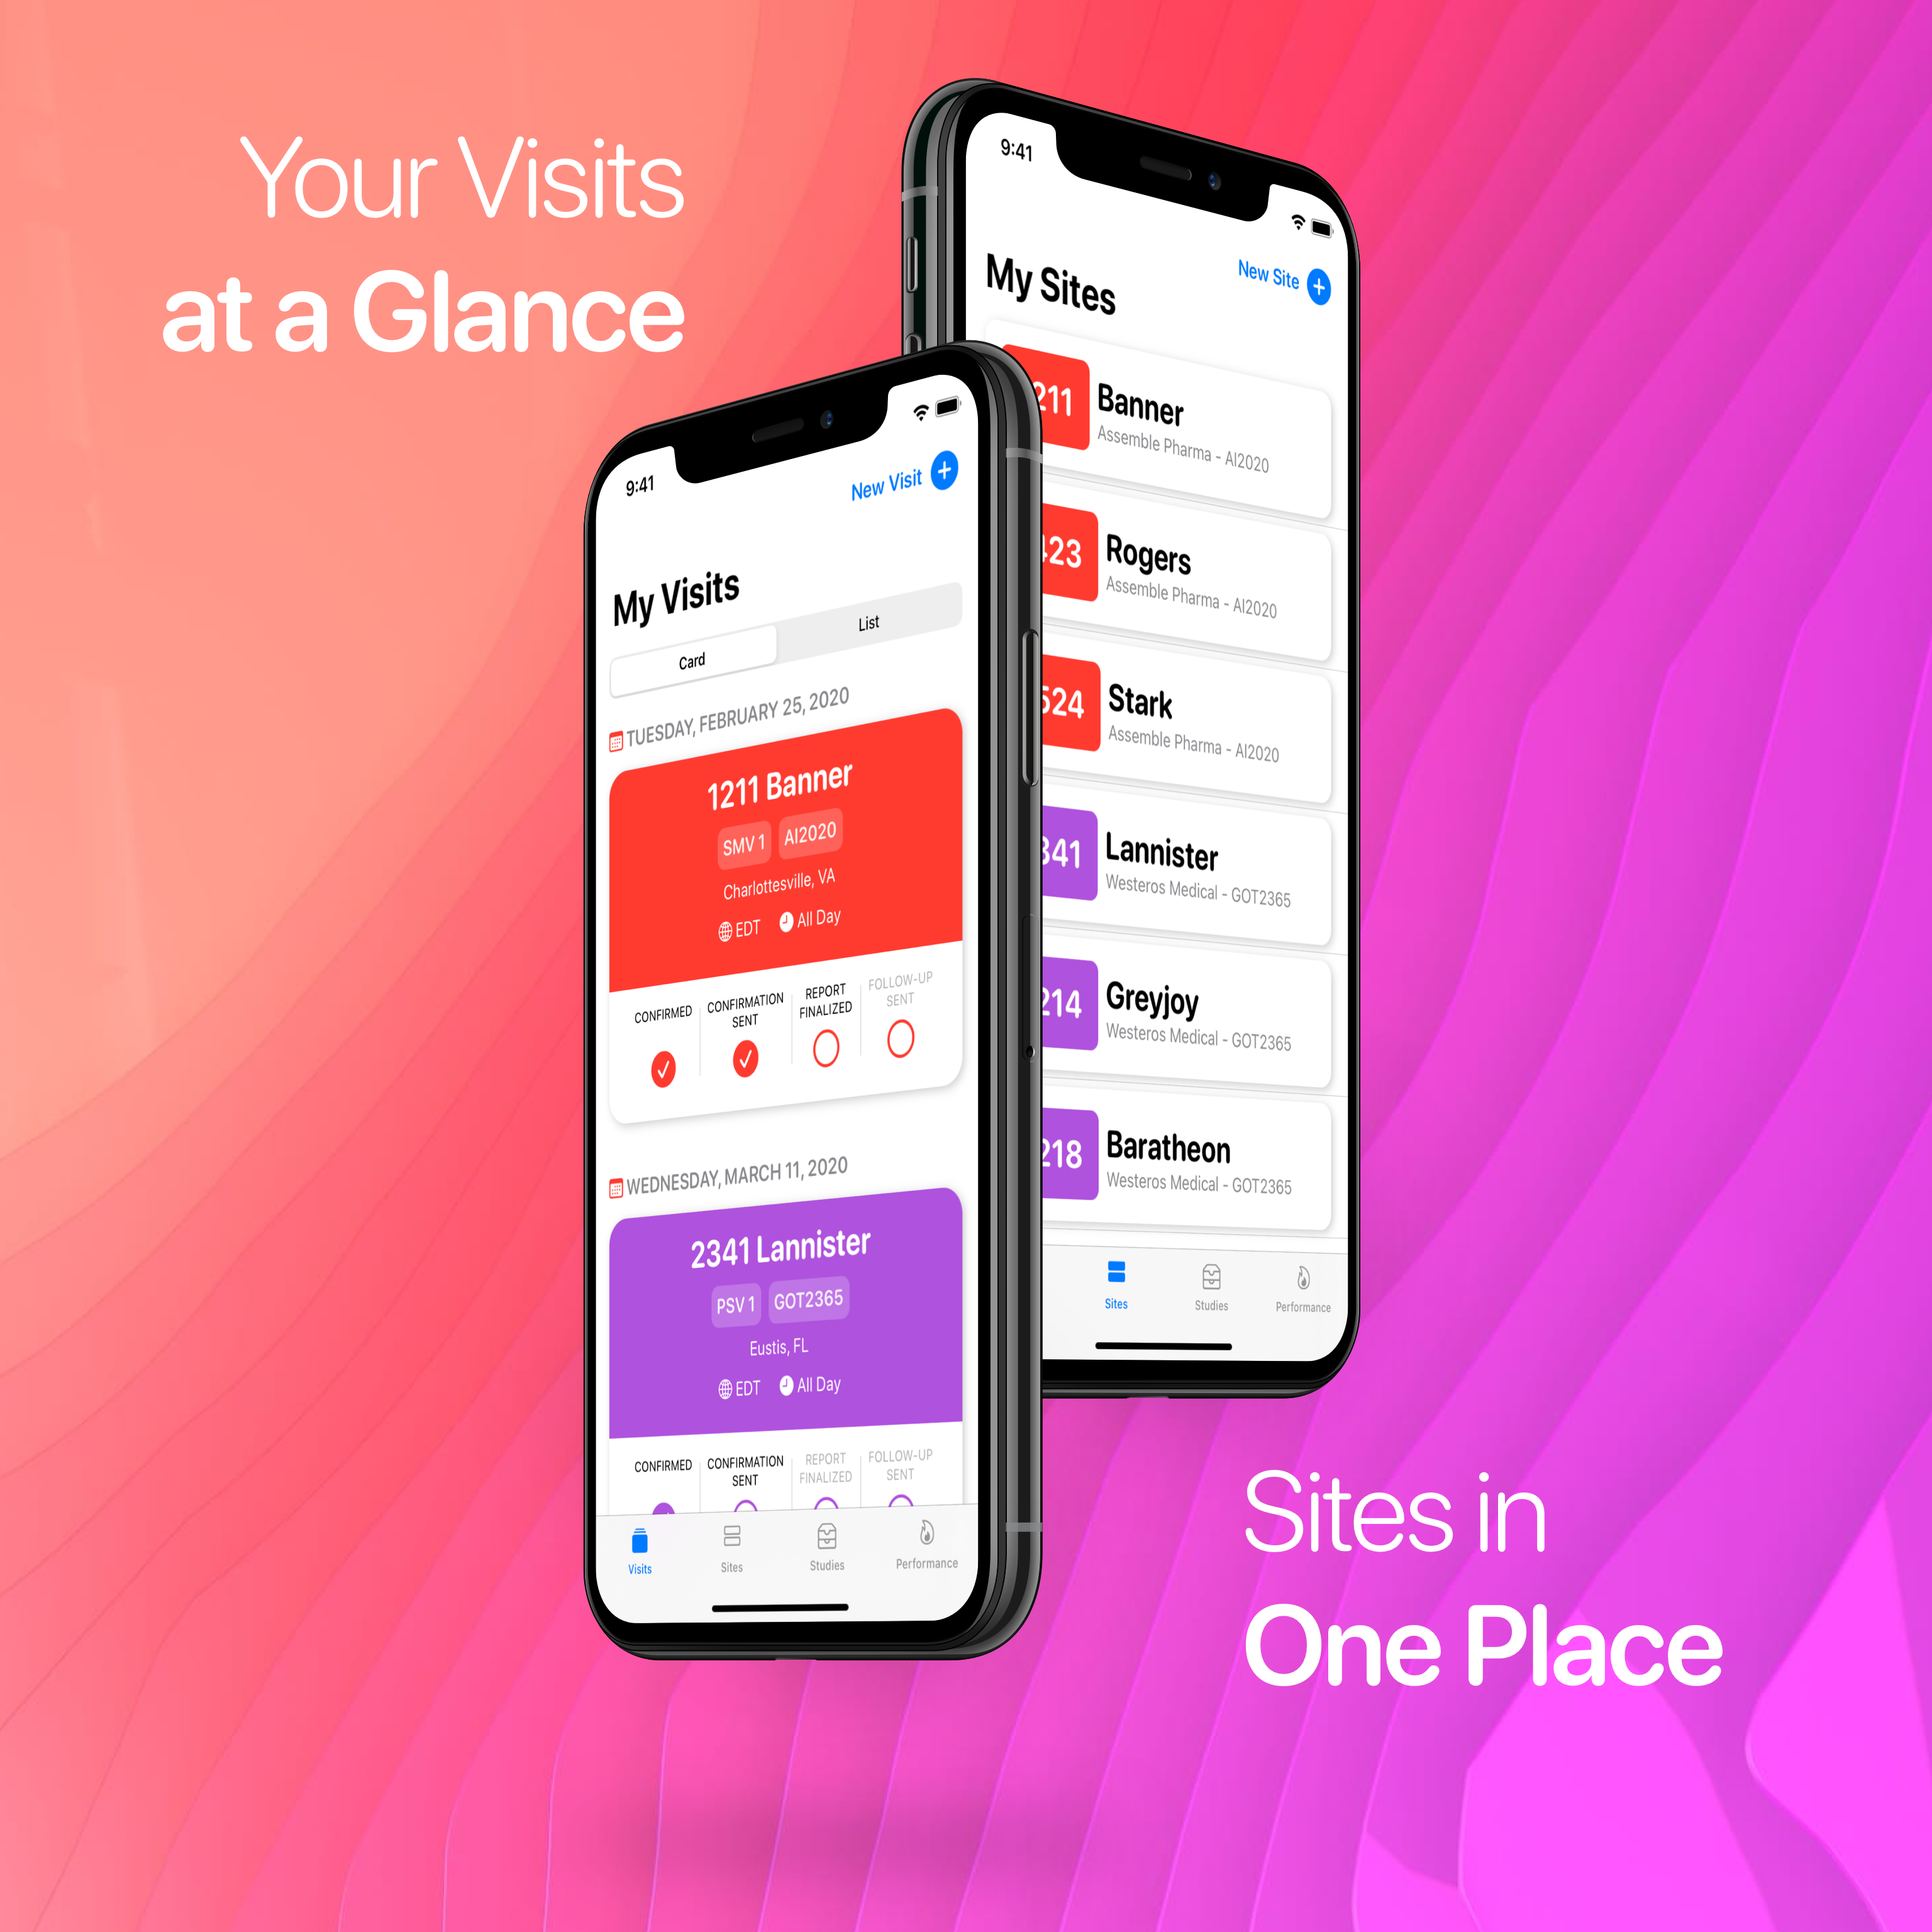 All visits in your phone